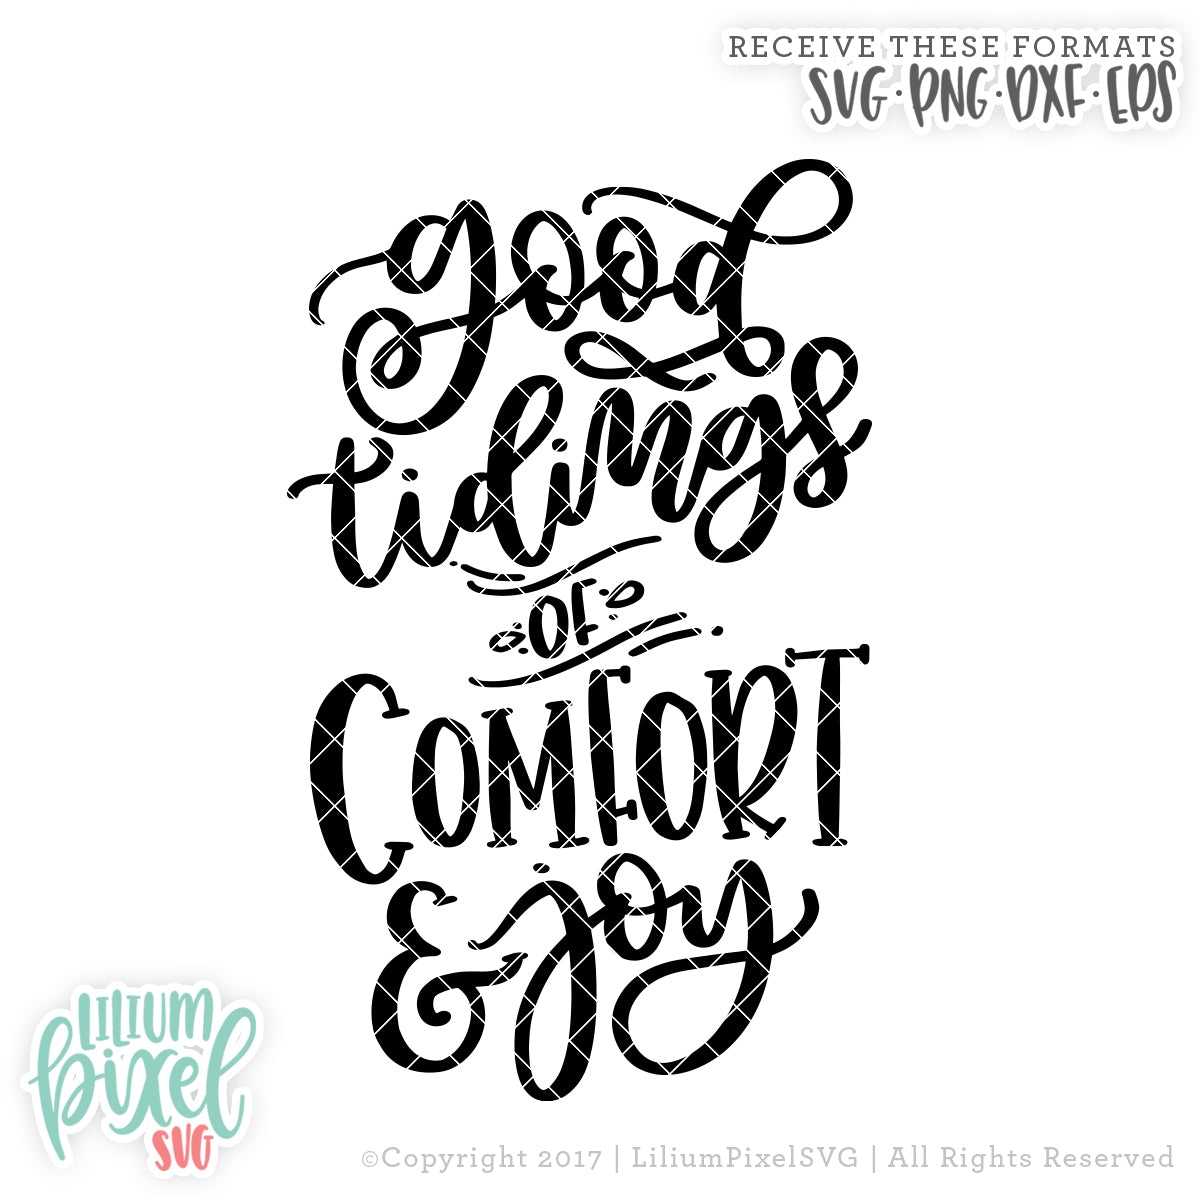 Good Tidings of Comfort and Joy - SVG PNG DXF EPS Cut File • Silhouette • Cricut • More